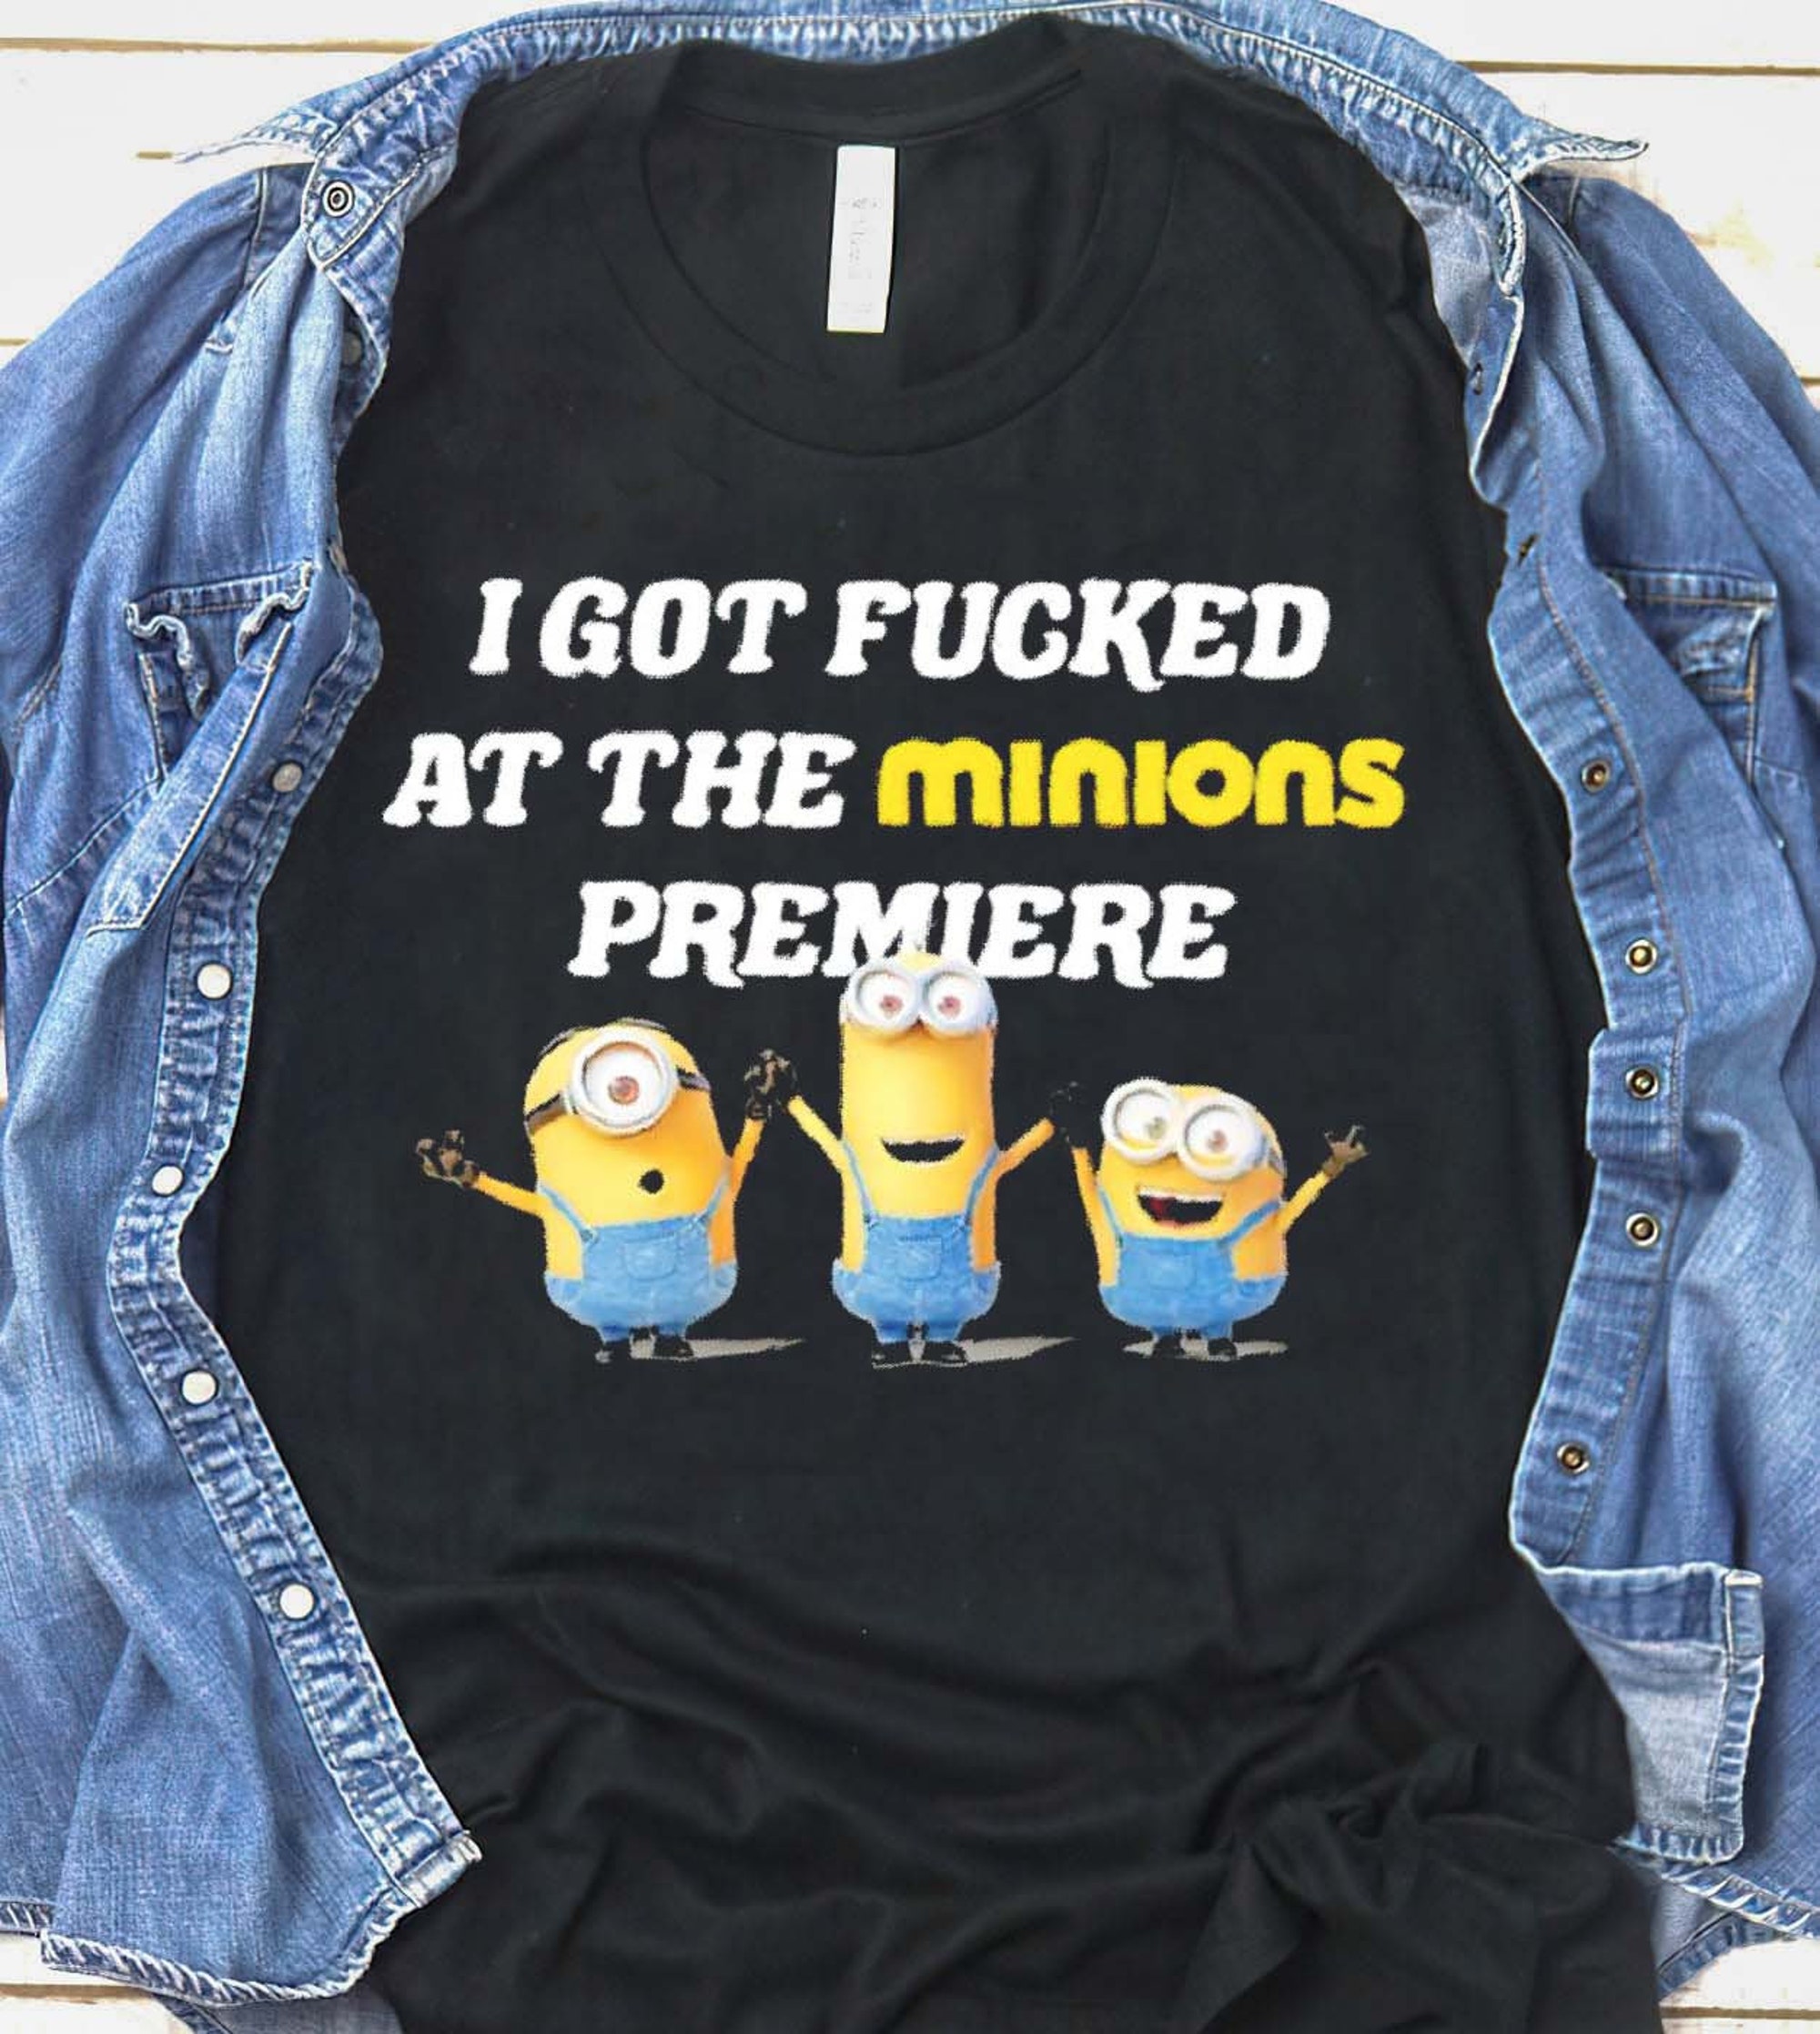 I got fucked at the minions premiere T shirt S to 5XL size Movie Shirt